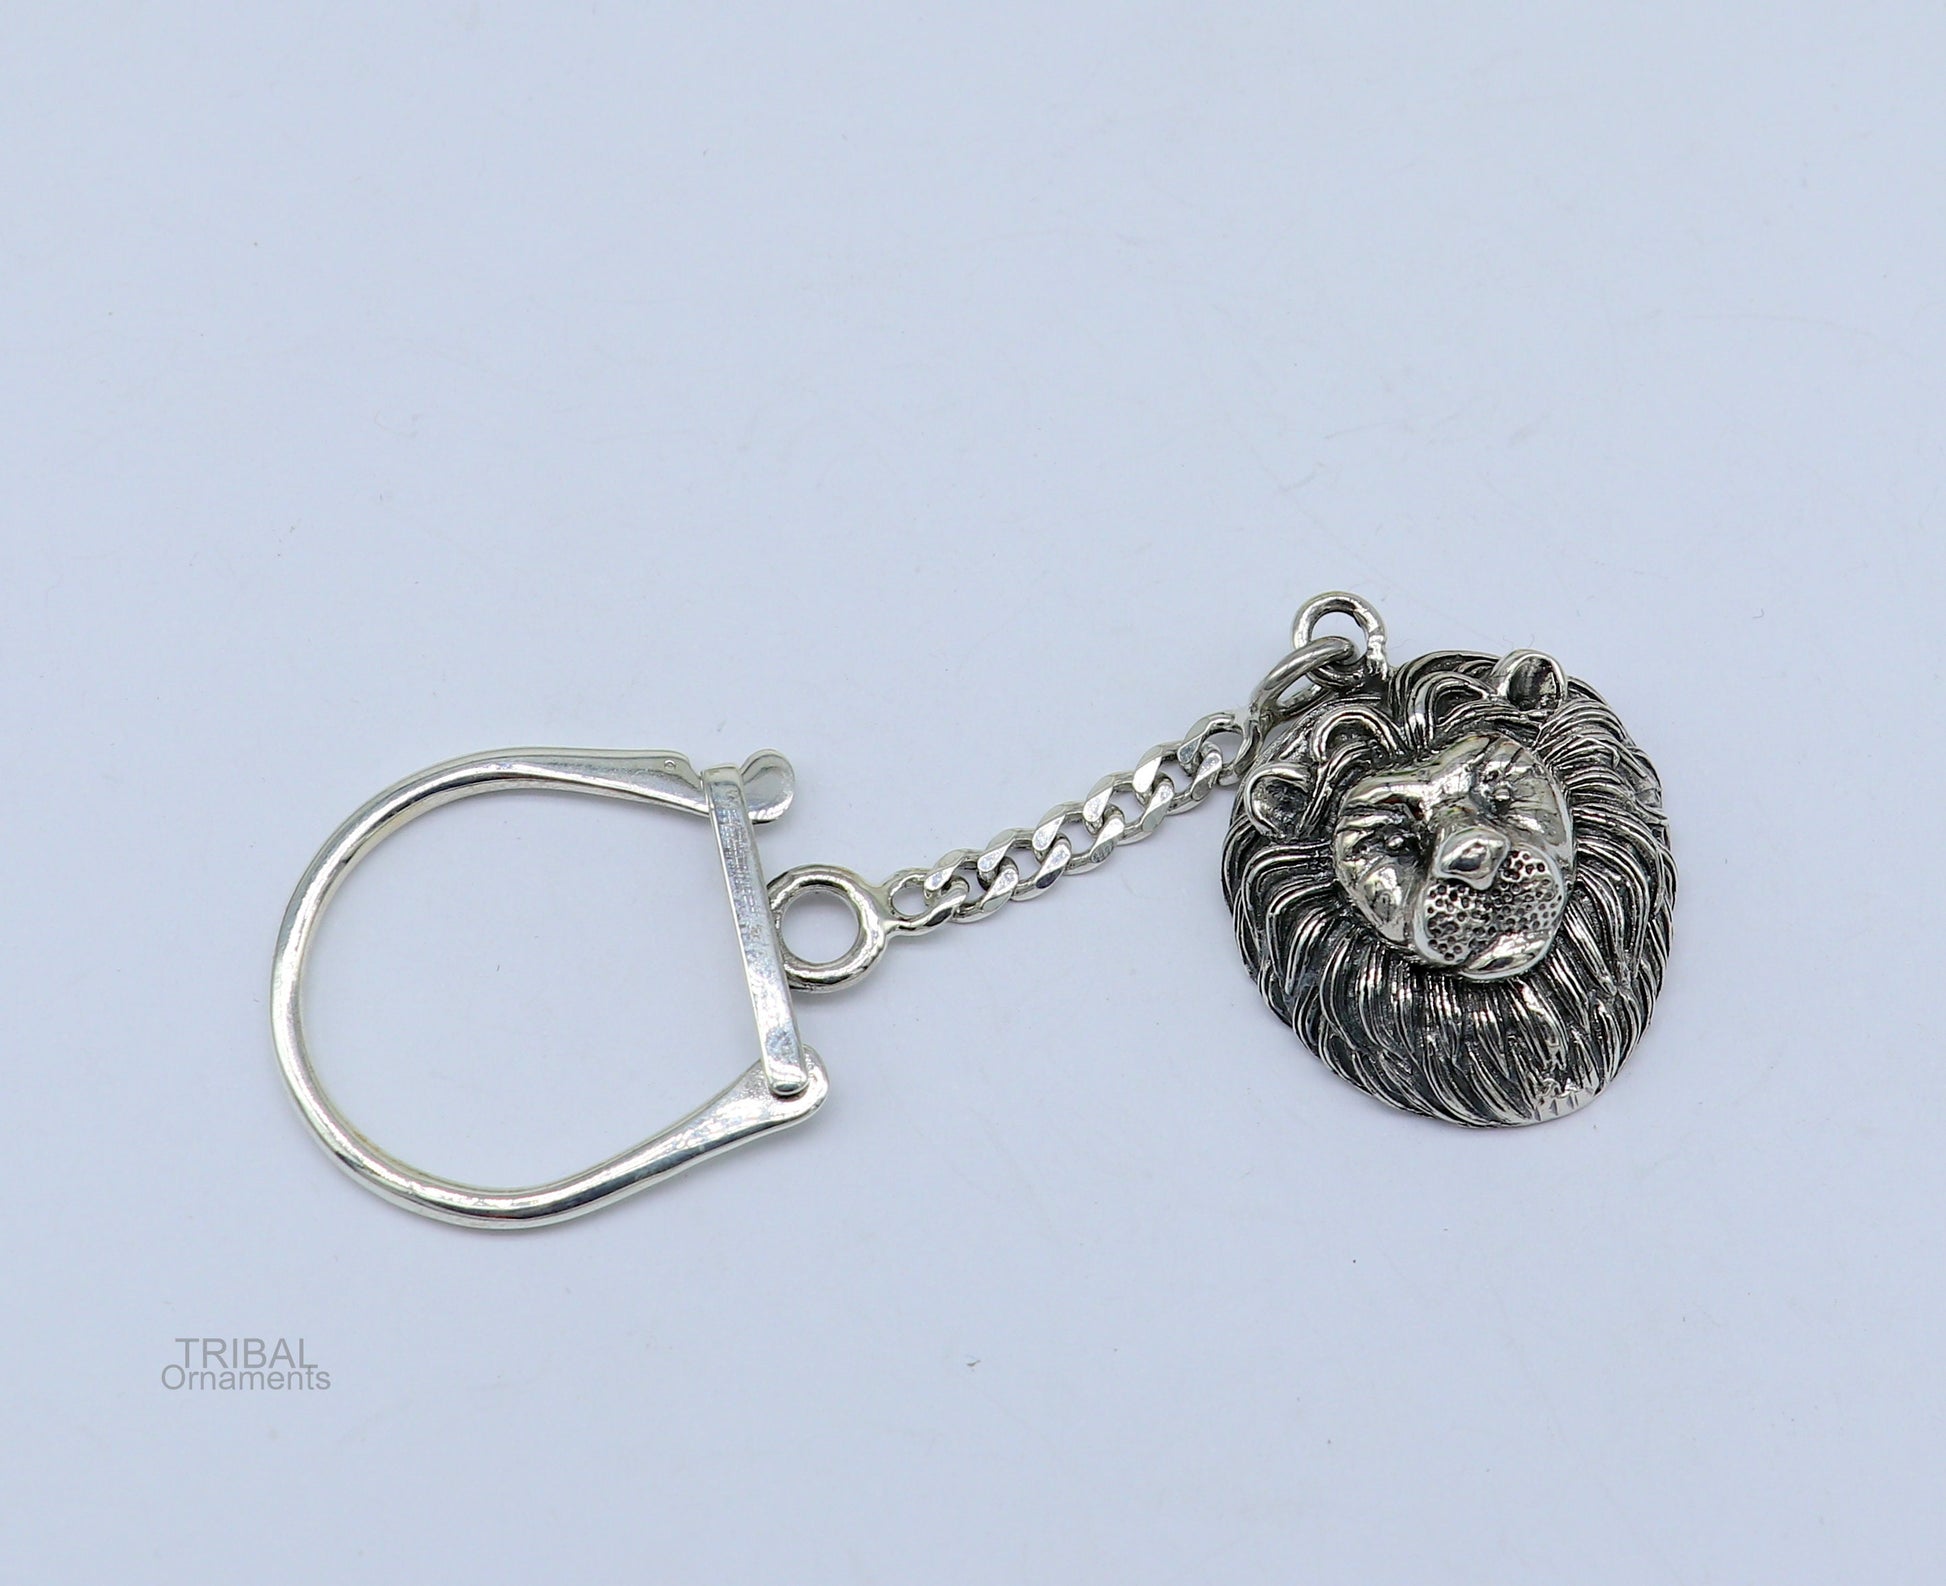 Vintage design handmade 925 sterling silver key chain, silver lion key chain, best gifting charming key chain jewelry KCH01 - TRIBAL ORNAMENTS